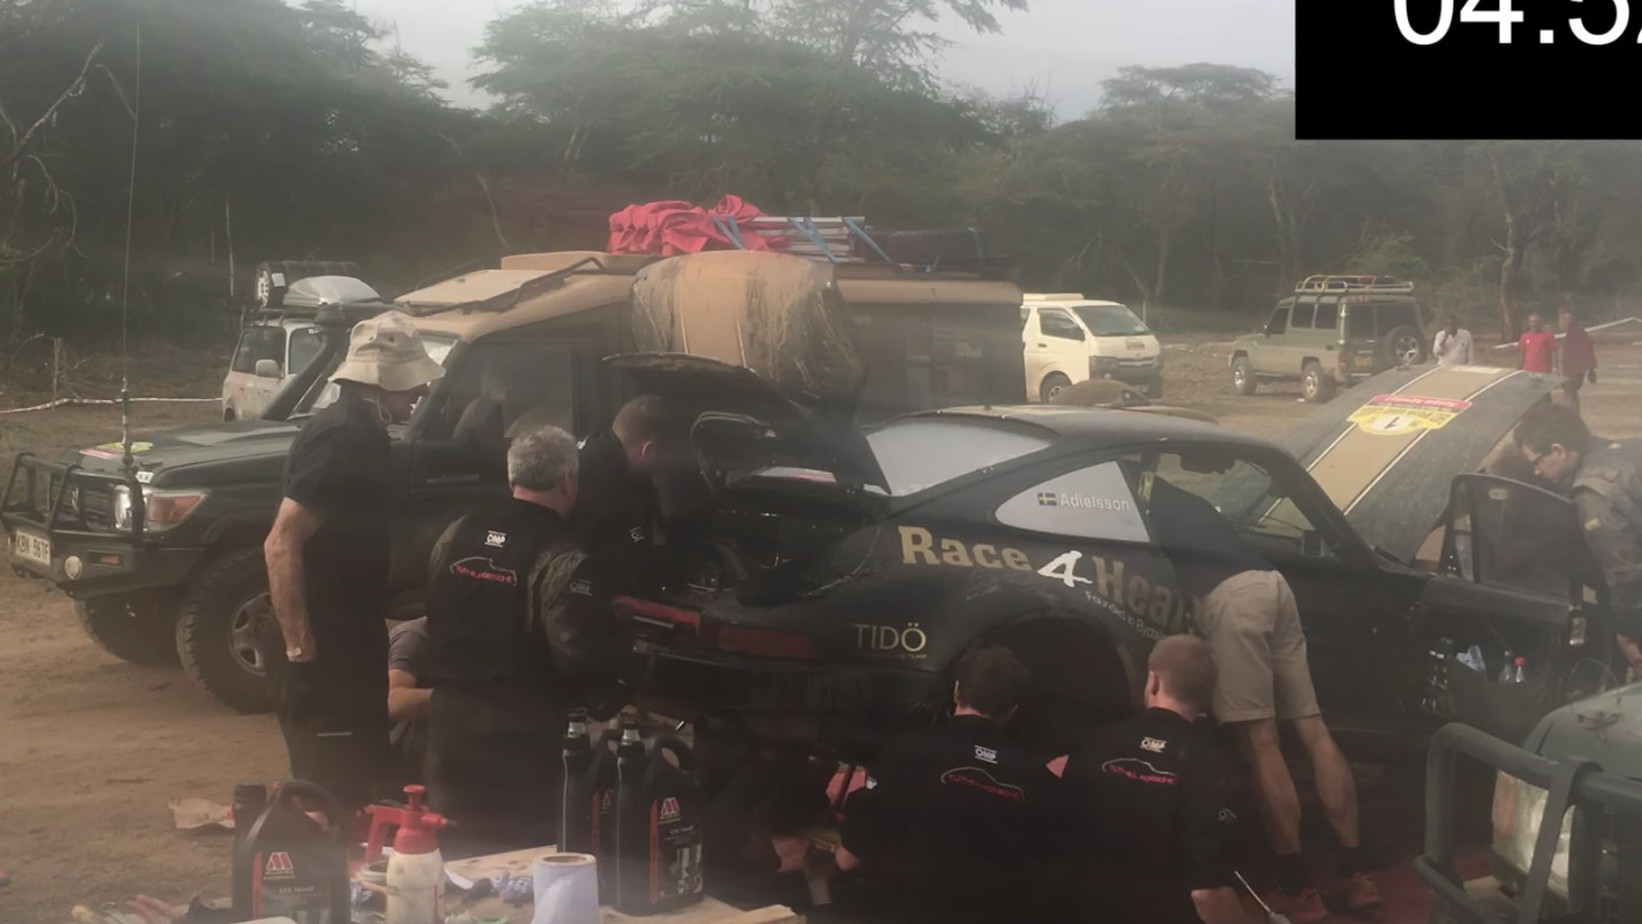 A Porsche rally team swaps an engine and transmission in under 12 minutes